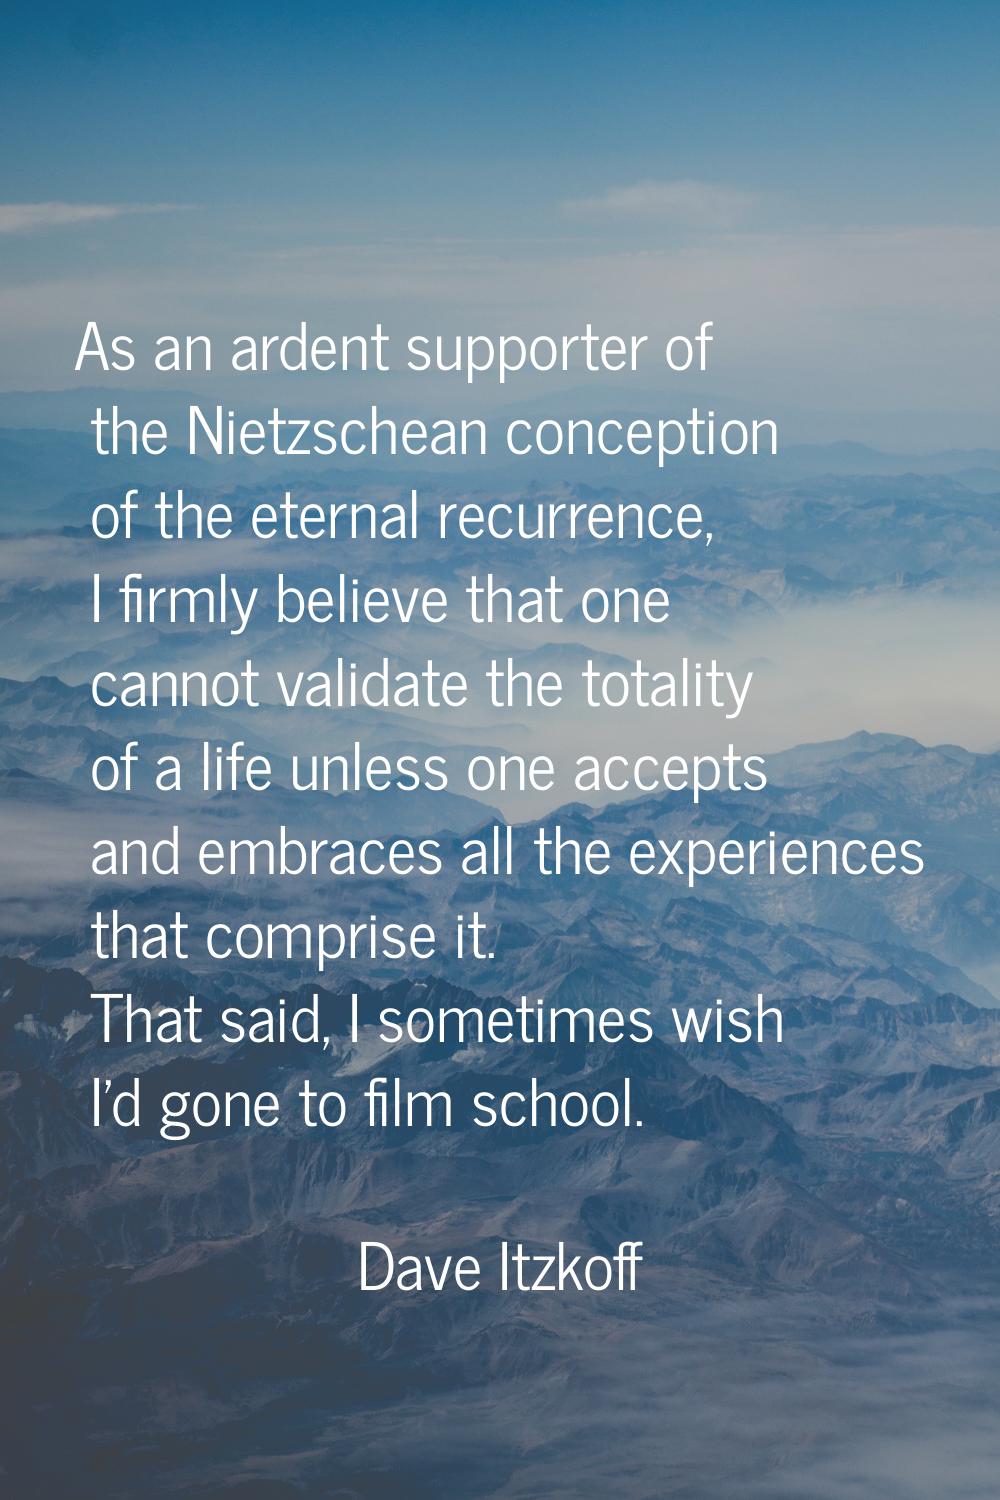 As an ardent supporter of the Nietzschean conception of the eternal recurrence, I firmly believe th